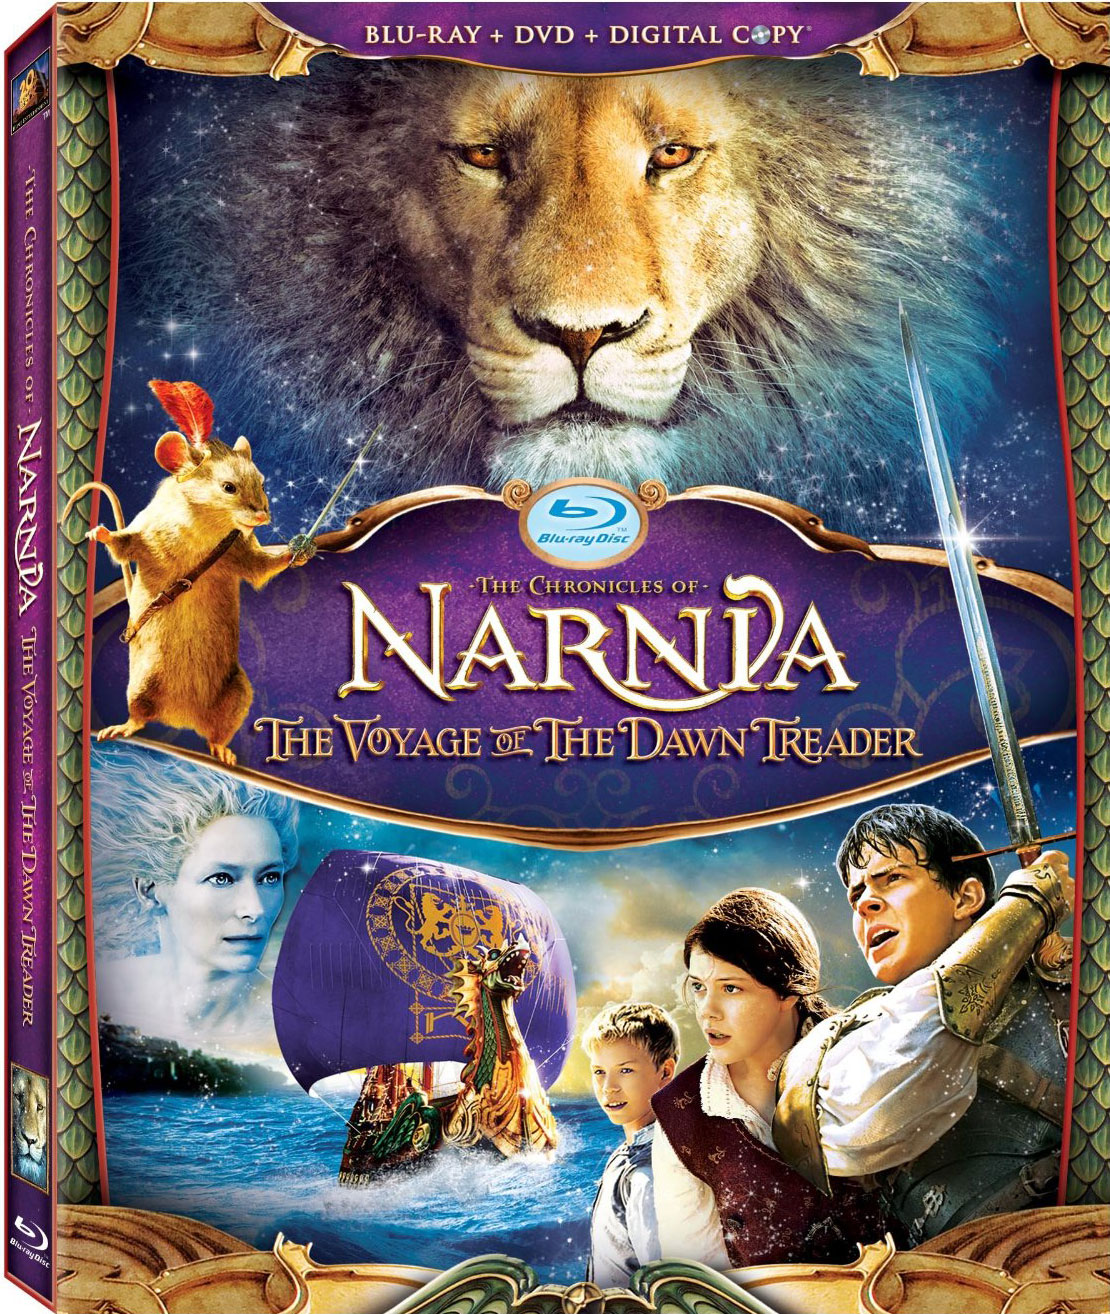 70 Greatest Lines in The Chronicles of Narnia, Talking Beasts - NarniaWeb